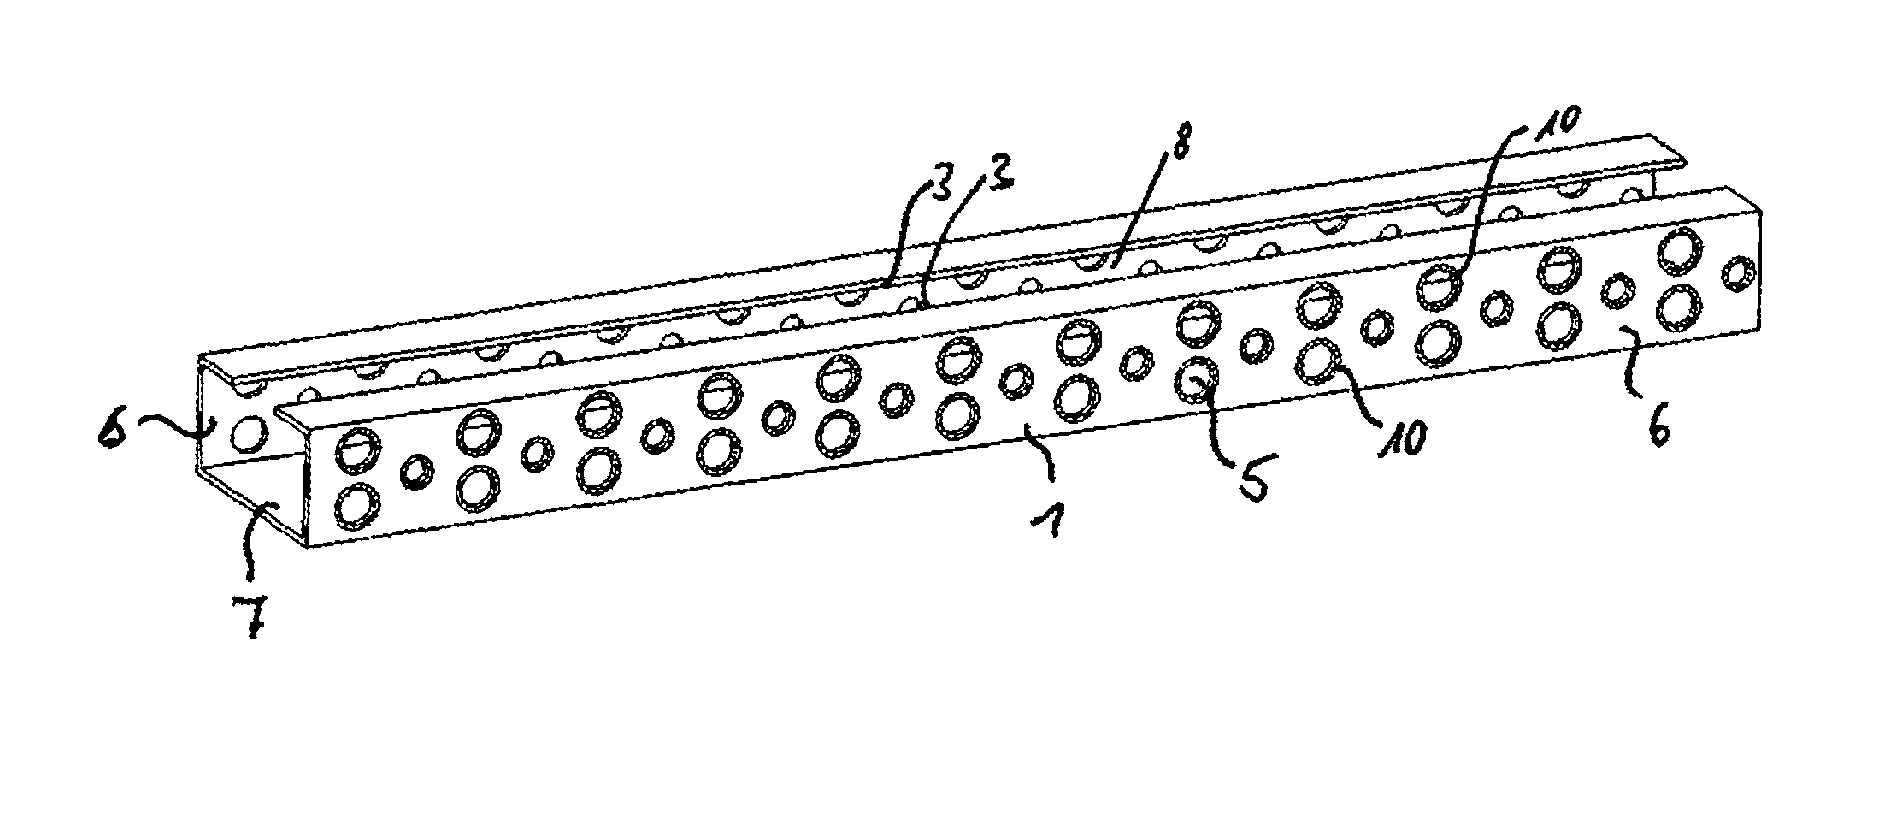 Method and device for hardening profiles